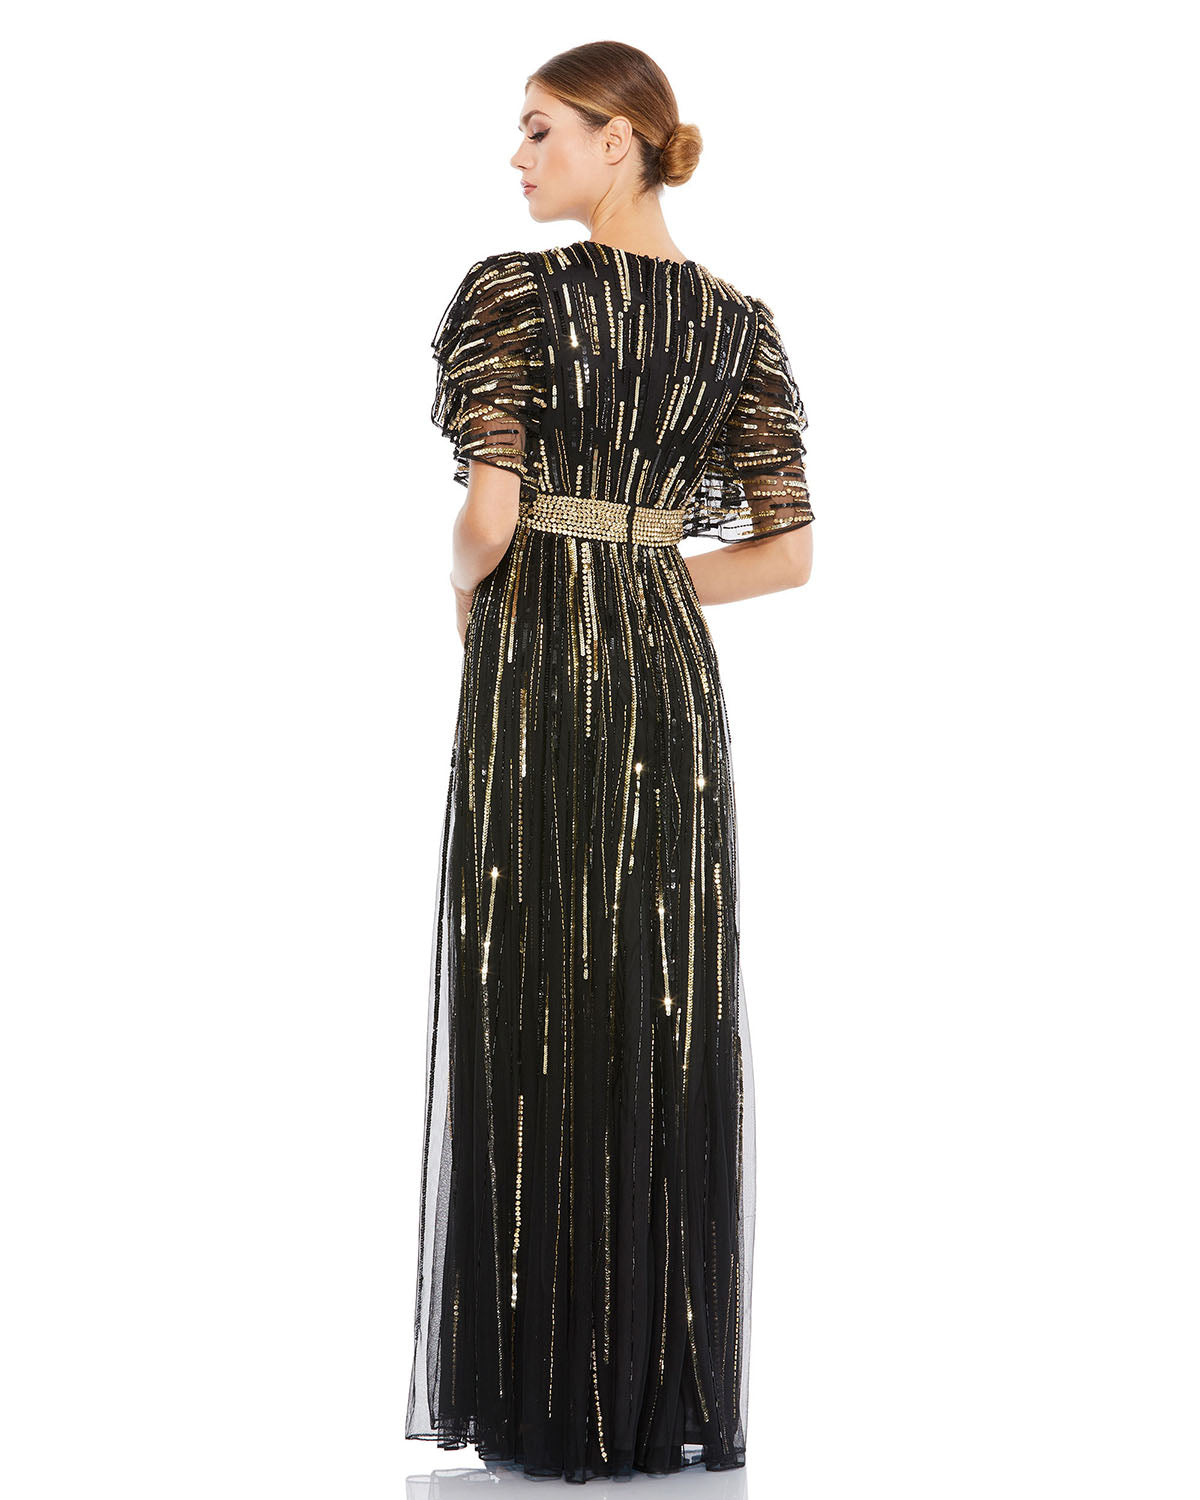 Embellished Full Length Layered Sleeve Gown